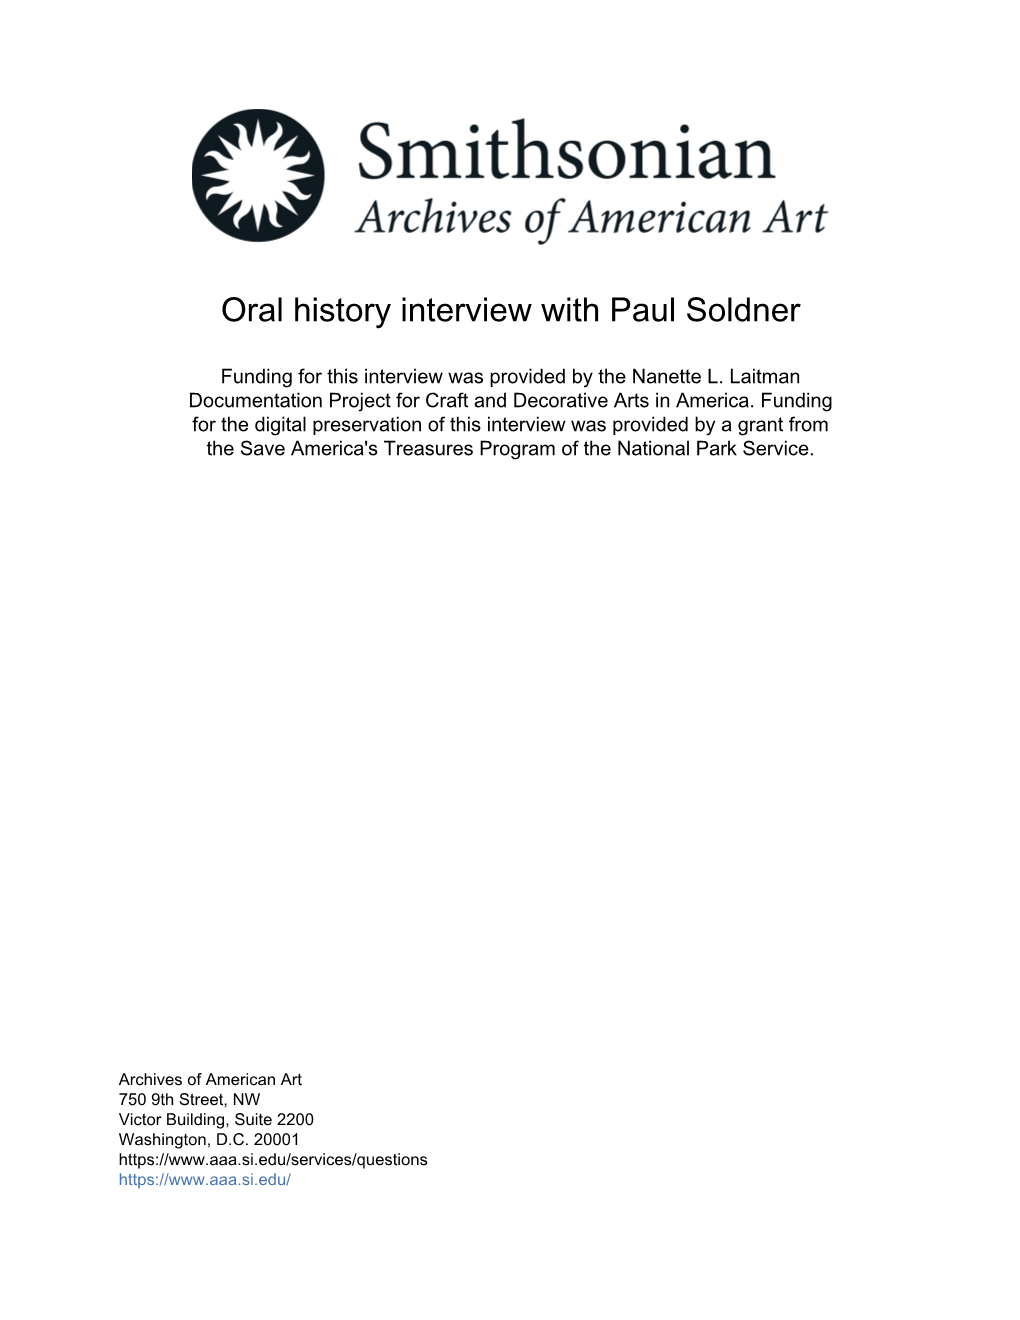 Oral History Interview with Paul Soldner